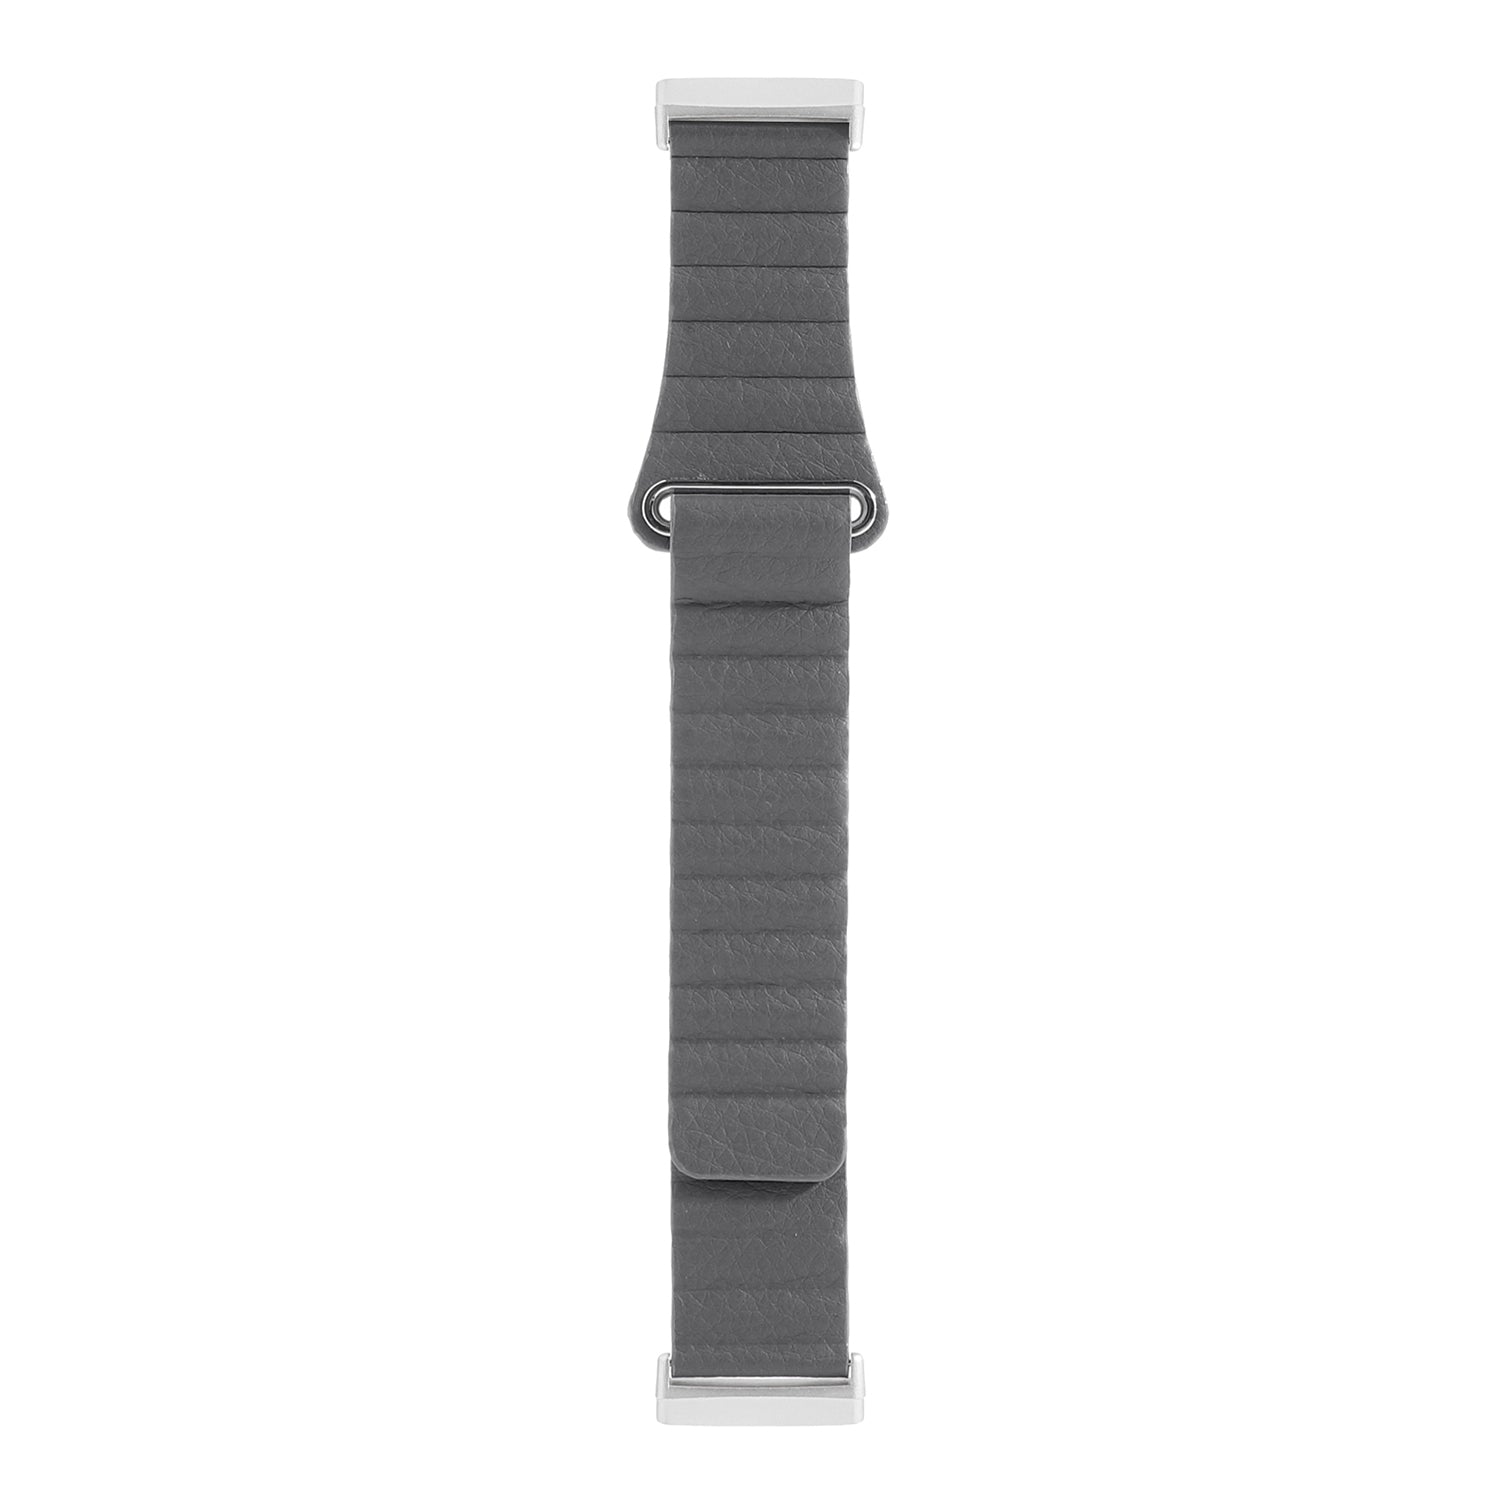 Genuine Leather Watchband Replacement 22mm for Fitbit Versa 3 - Grey